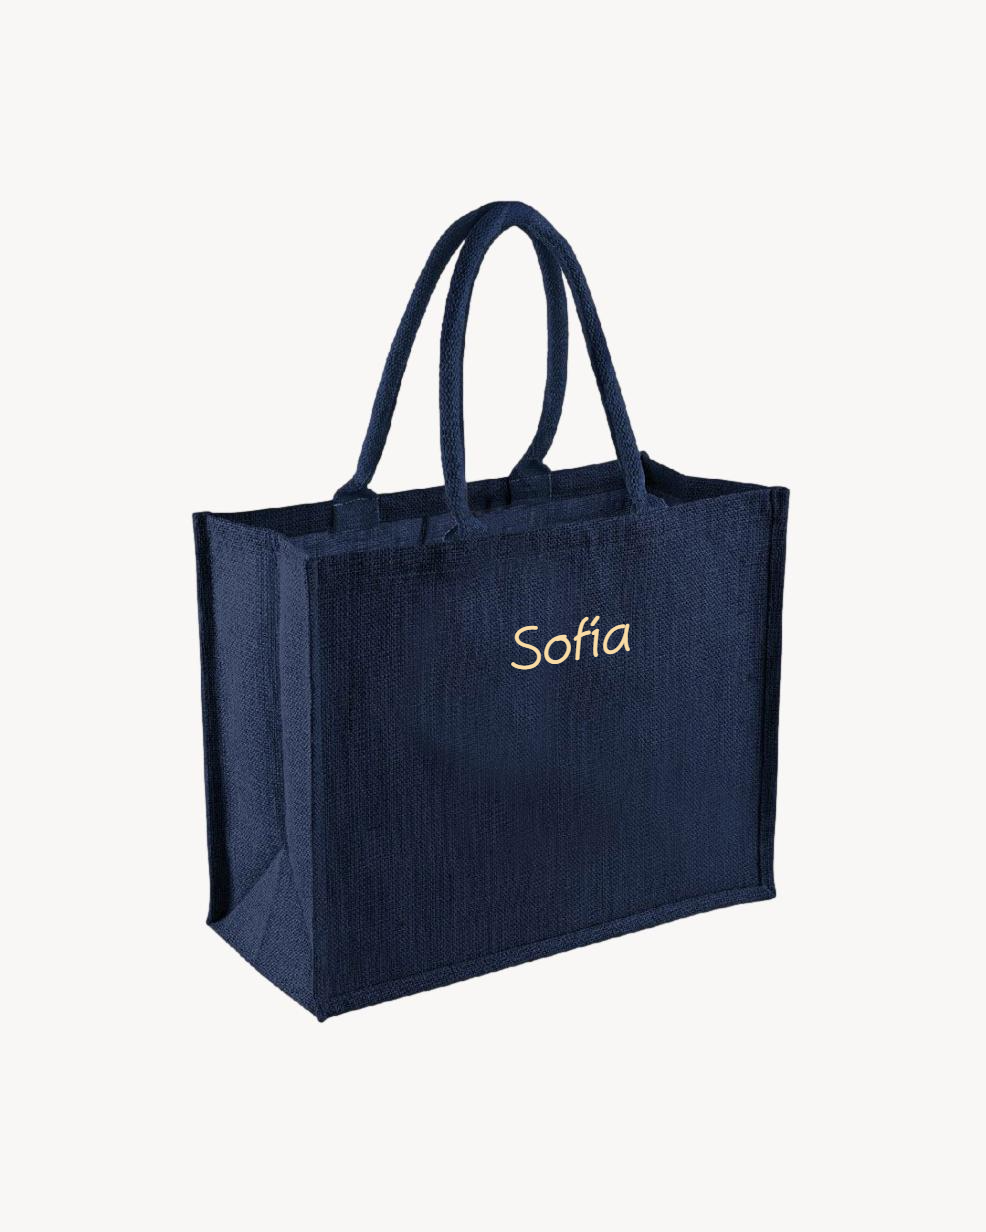 NAVY BLUE JUTE TOTE | PERSONALIZED